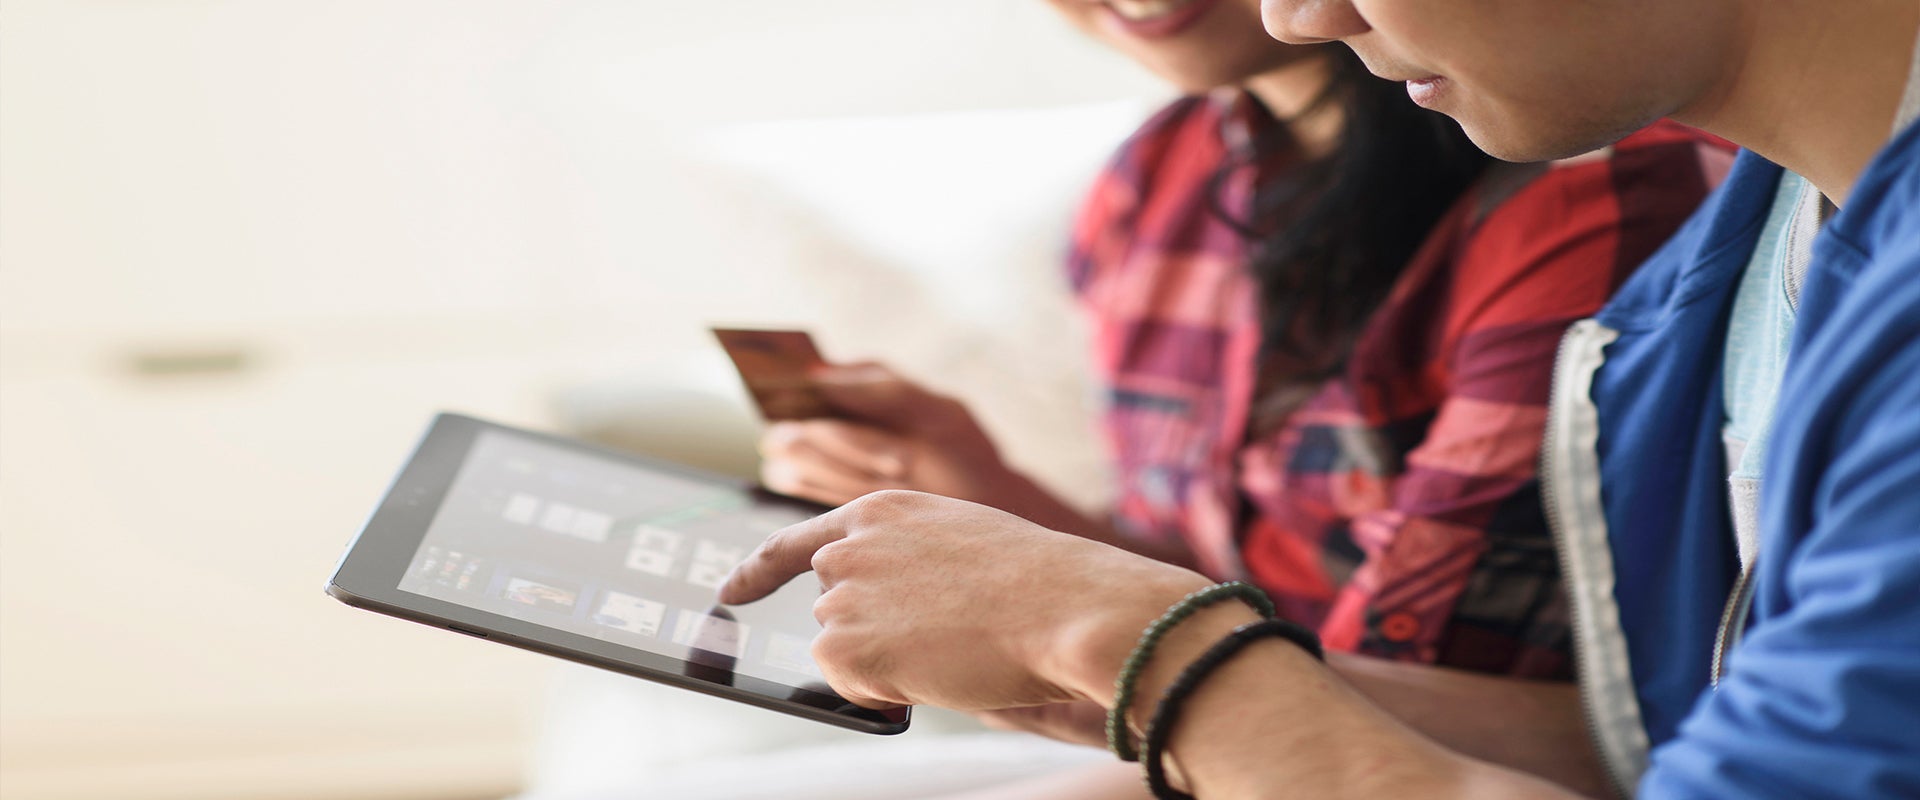 Retailers Play the Generation Game: Lessons From Adapting to Millennials